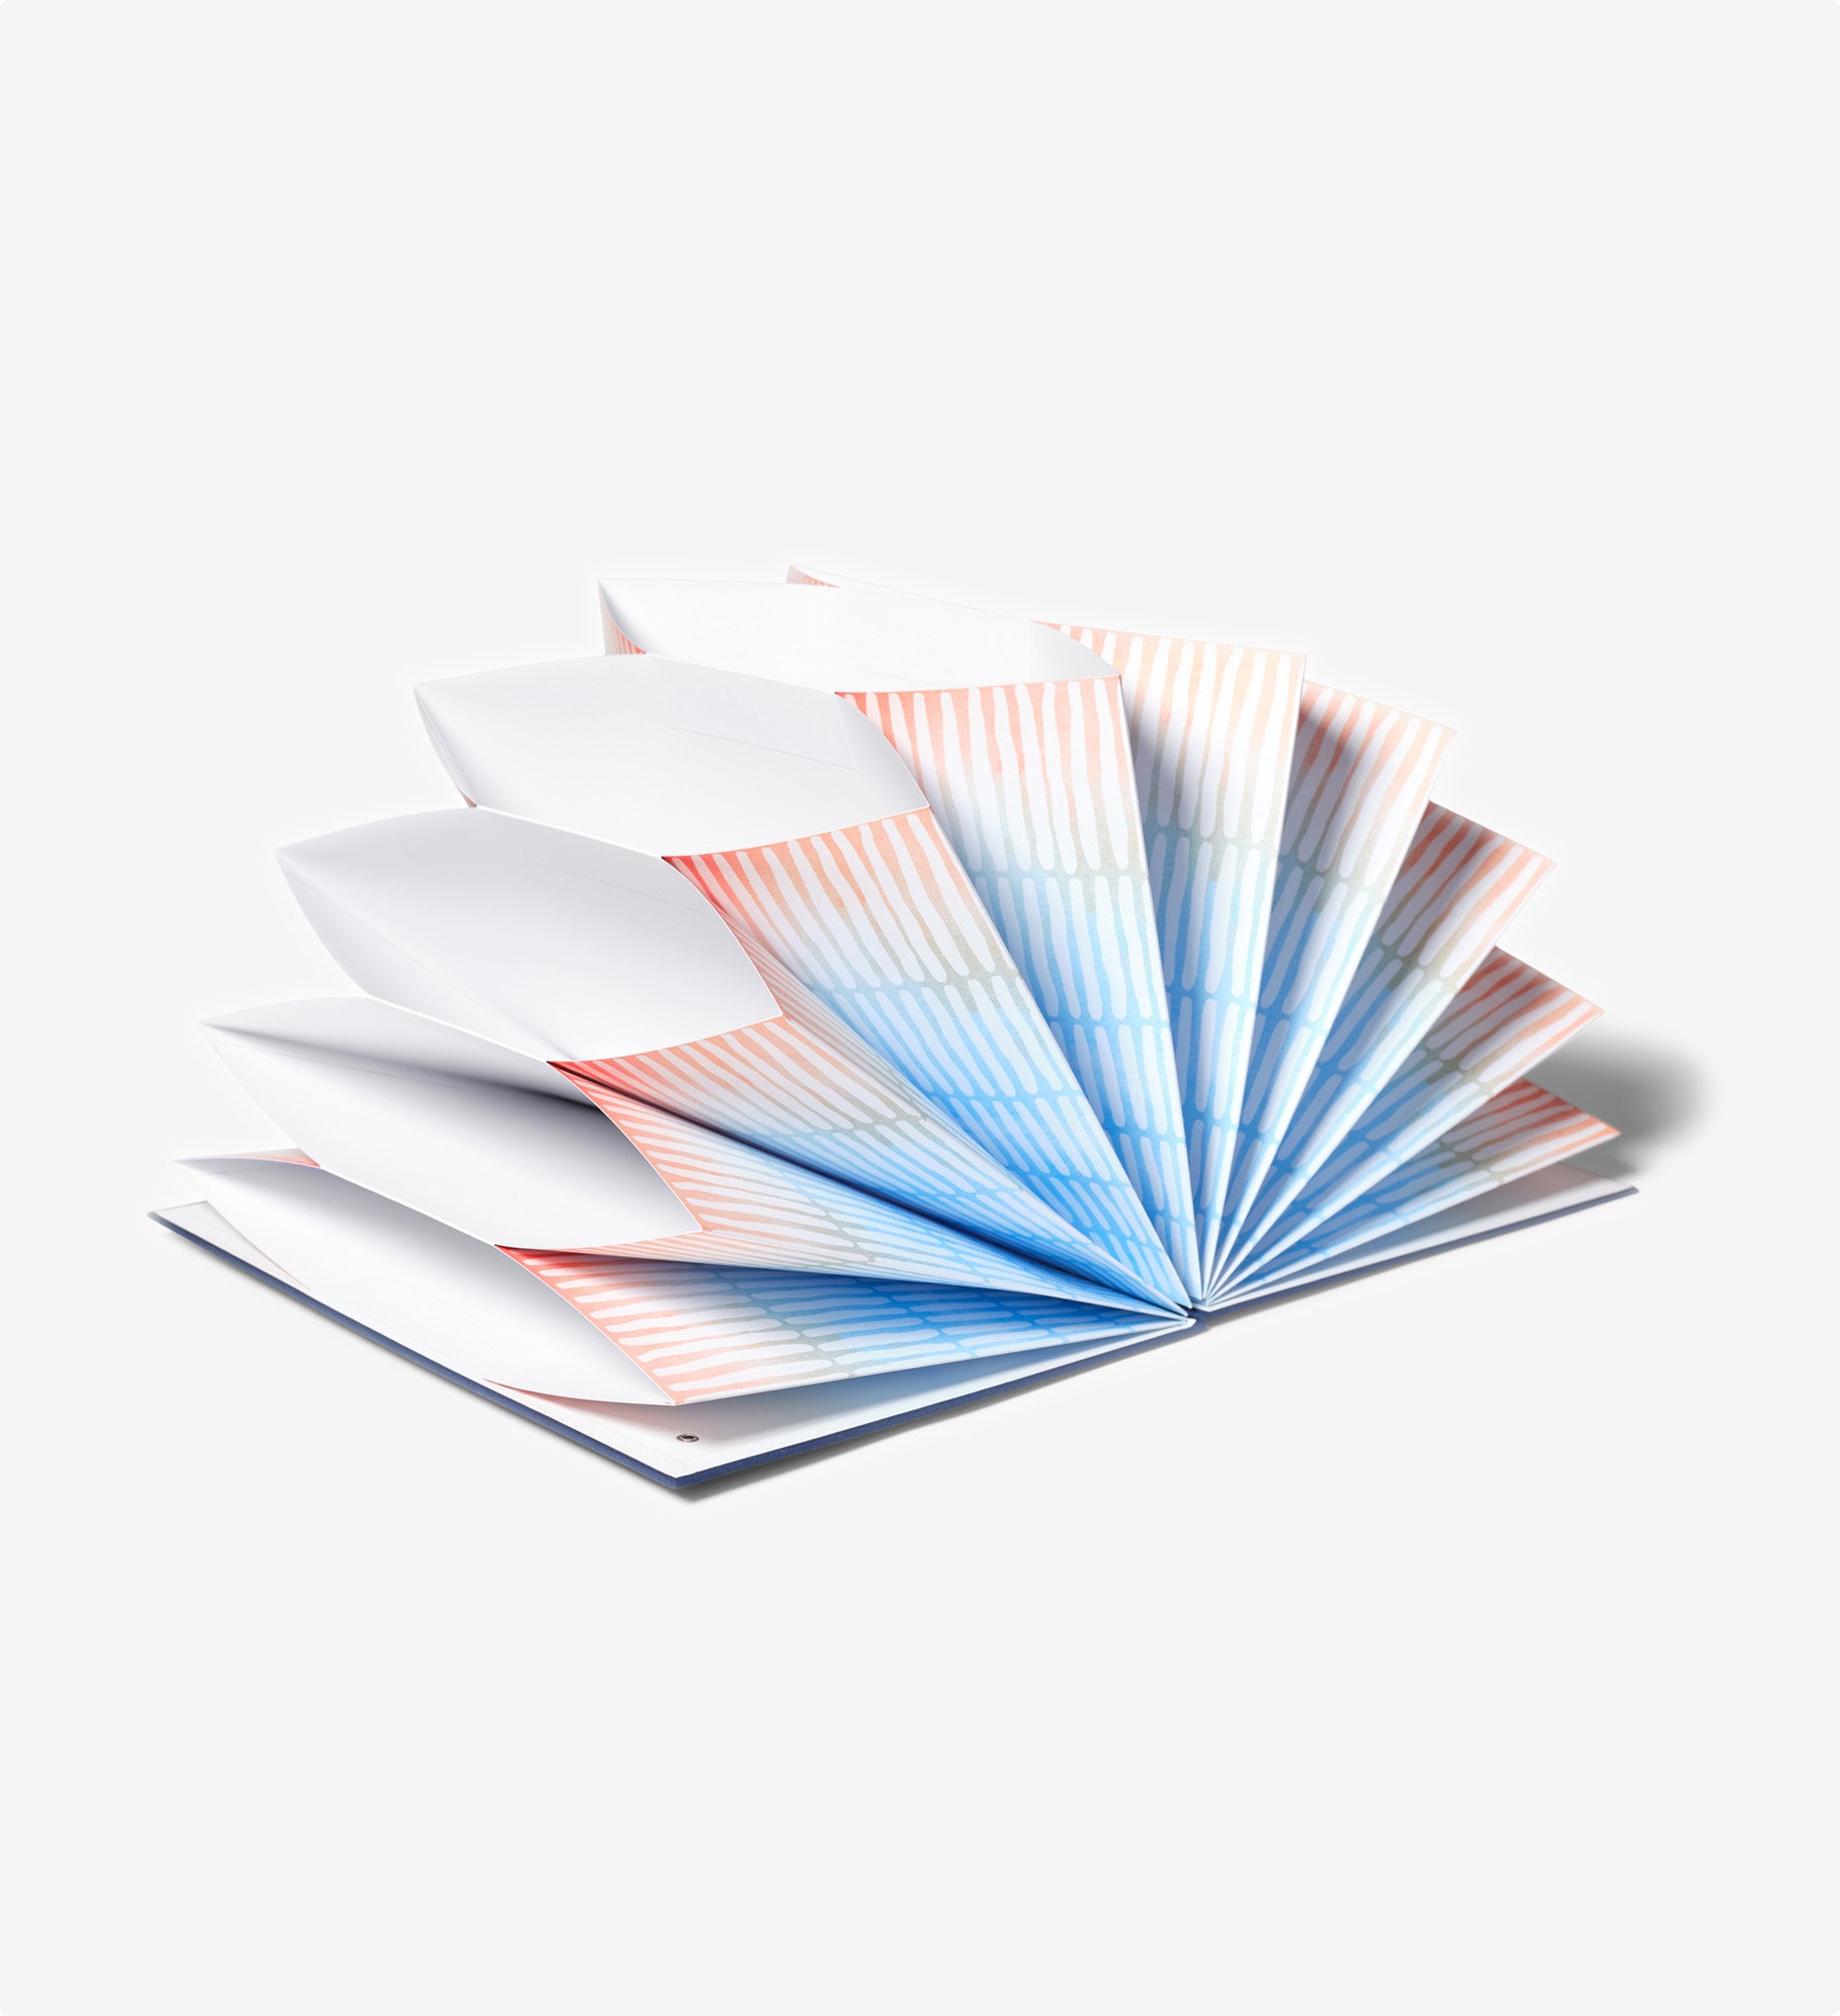 Savor fan folio open something blue with colorful interior